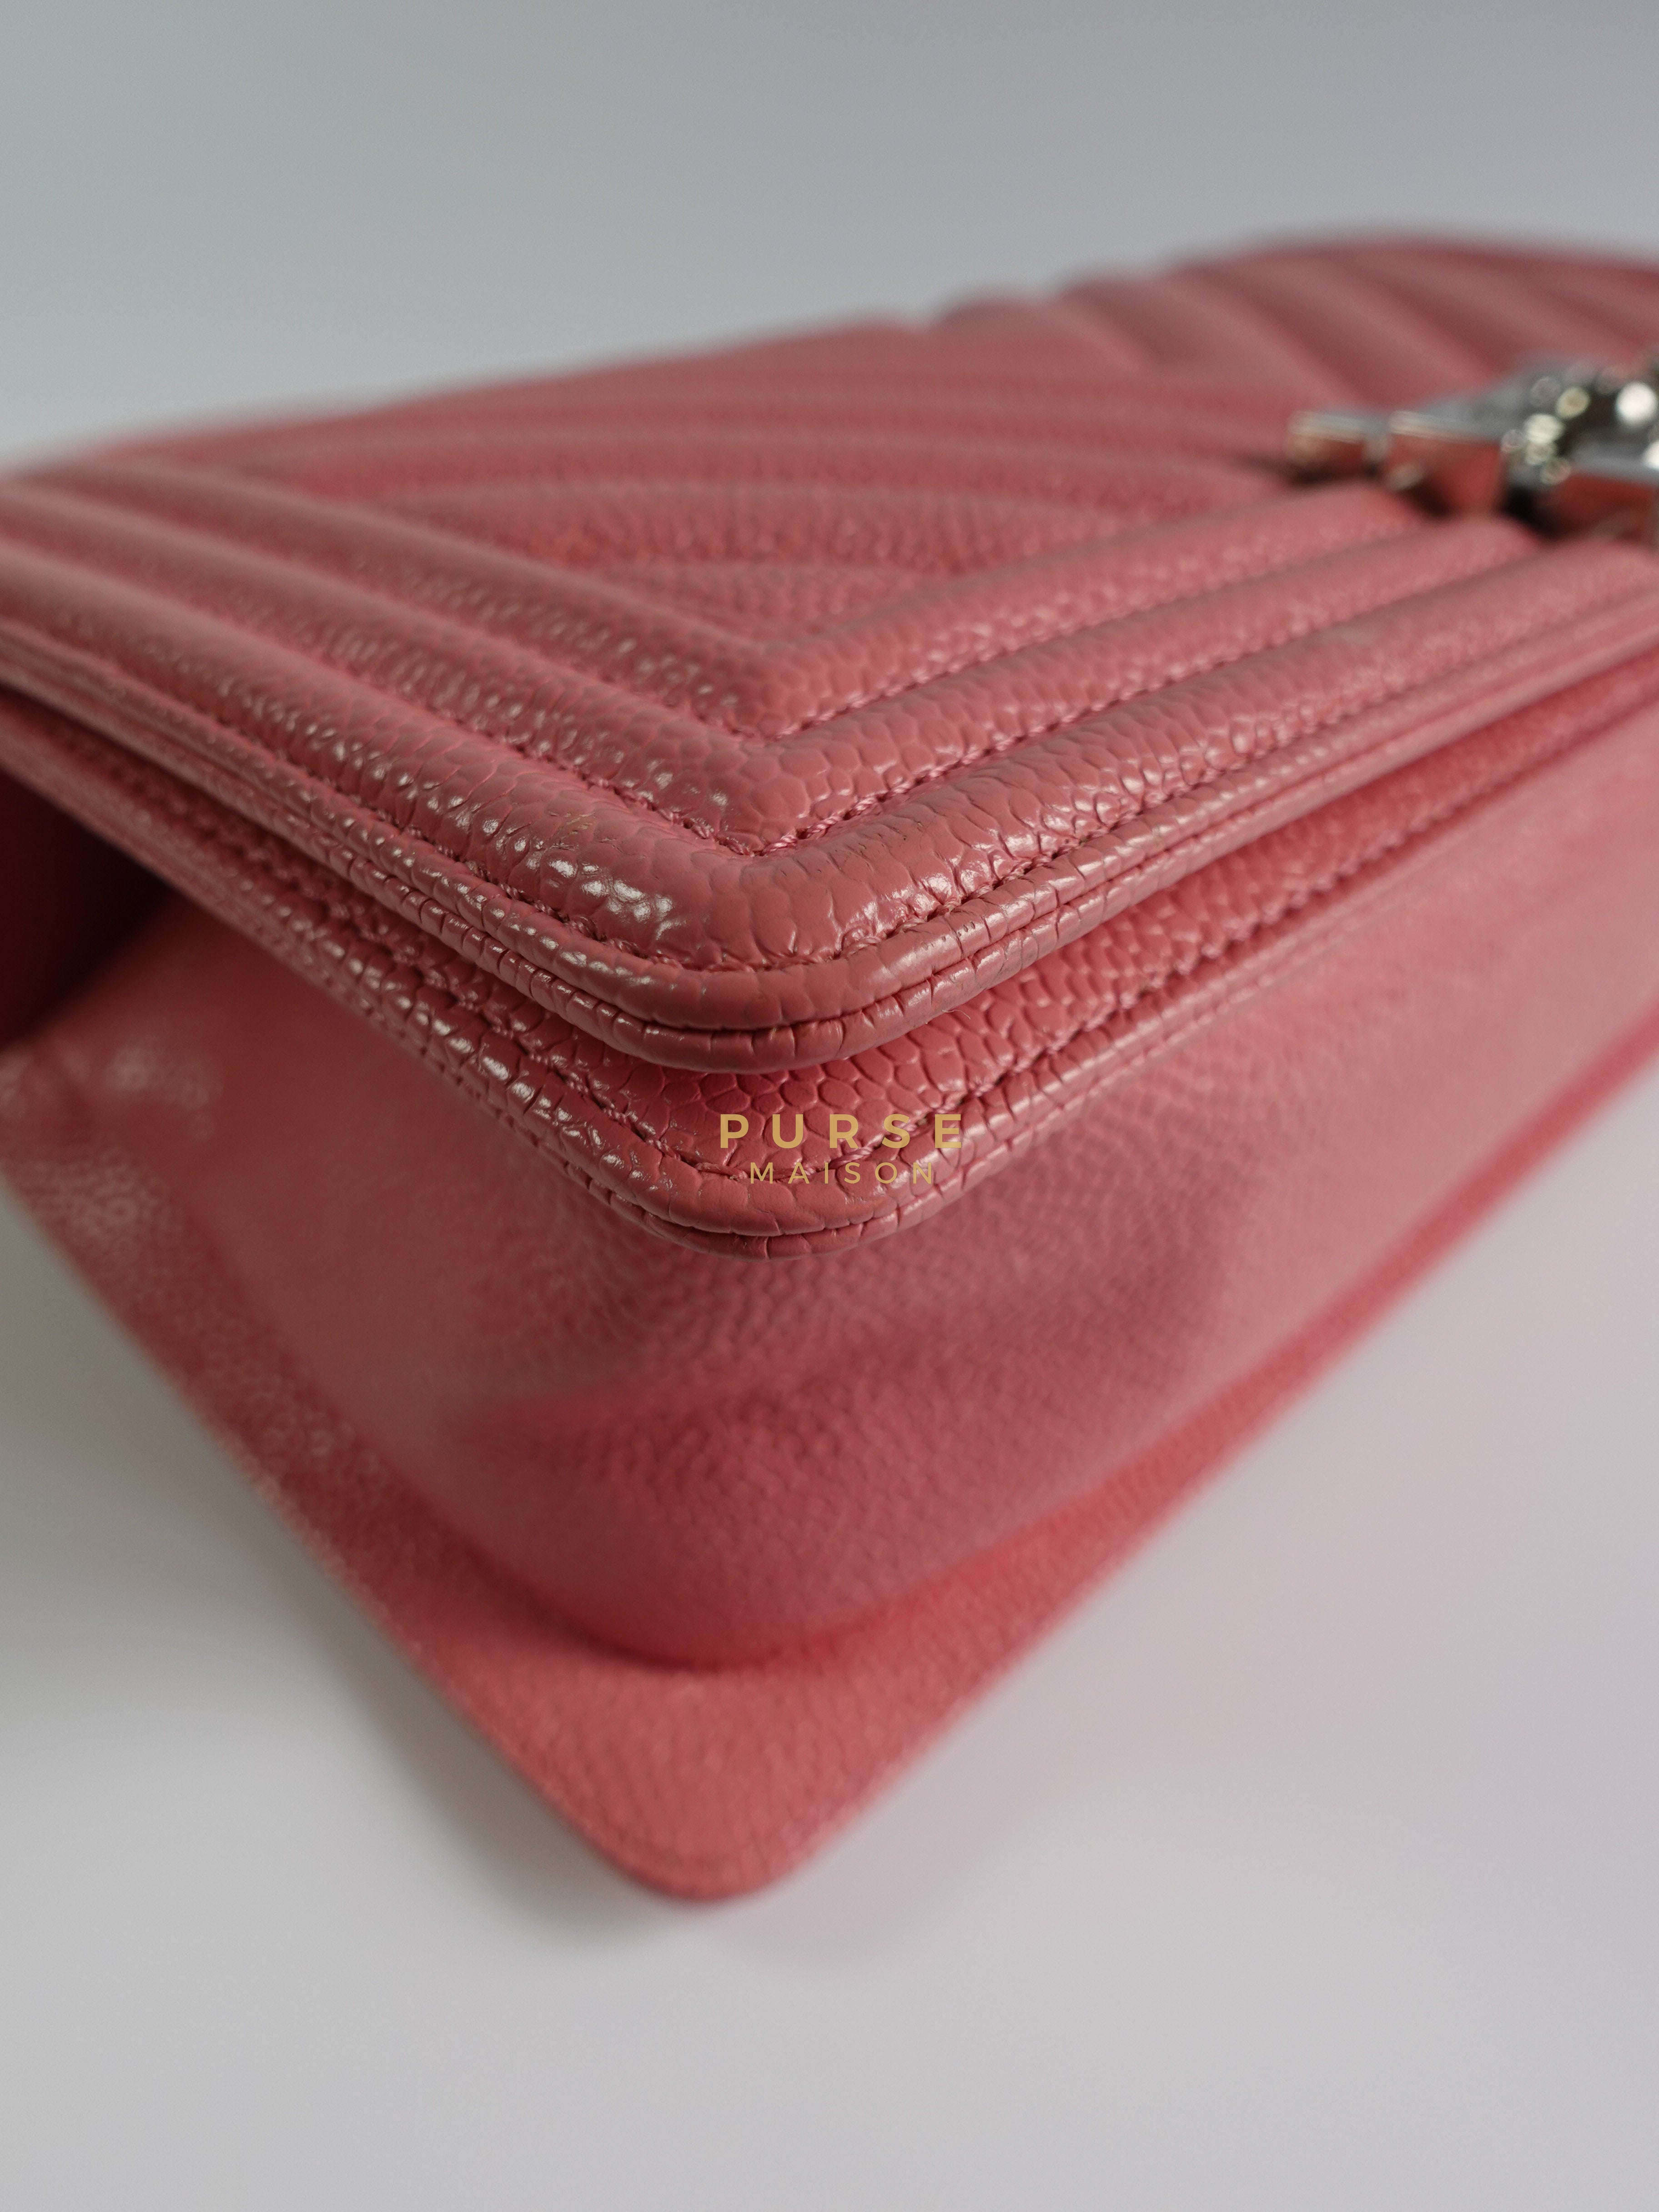 Boy Old Medium Chevron Pink Caviar Leather and Silver Hardware Series 29 | Purse Maison Luxury Bags Shop